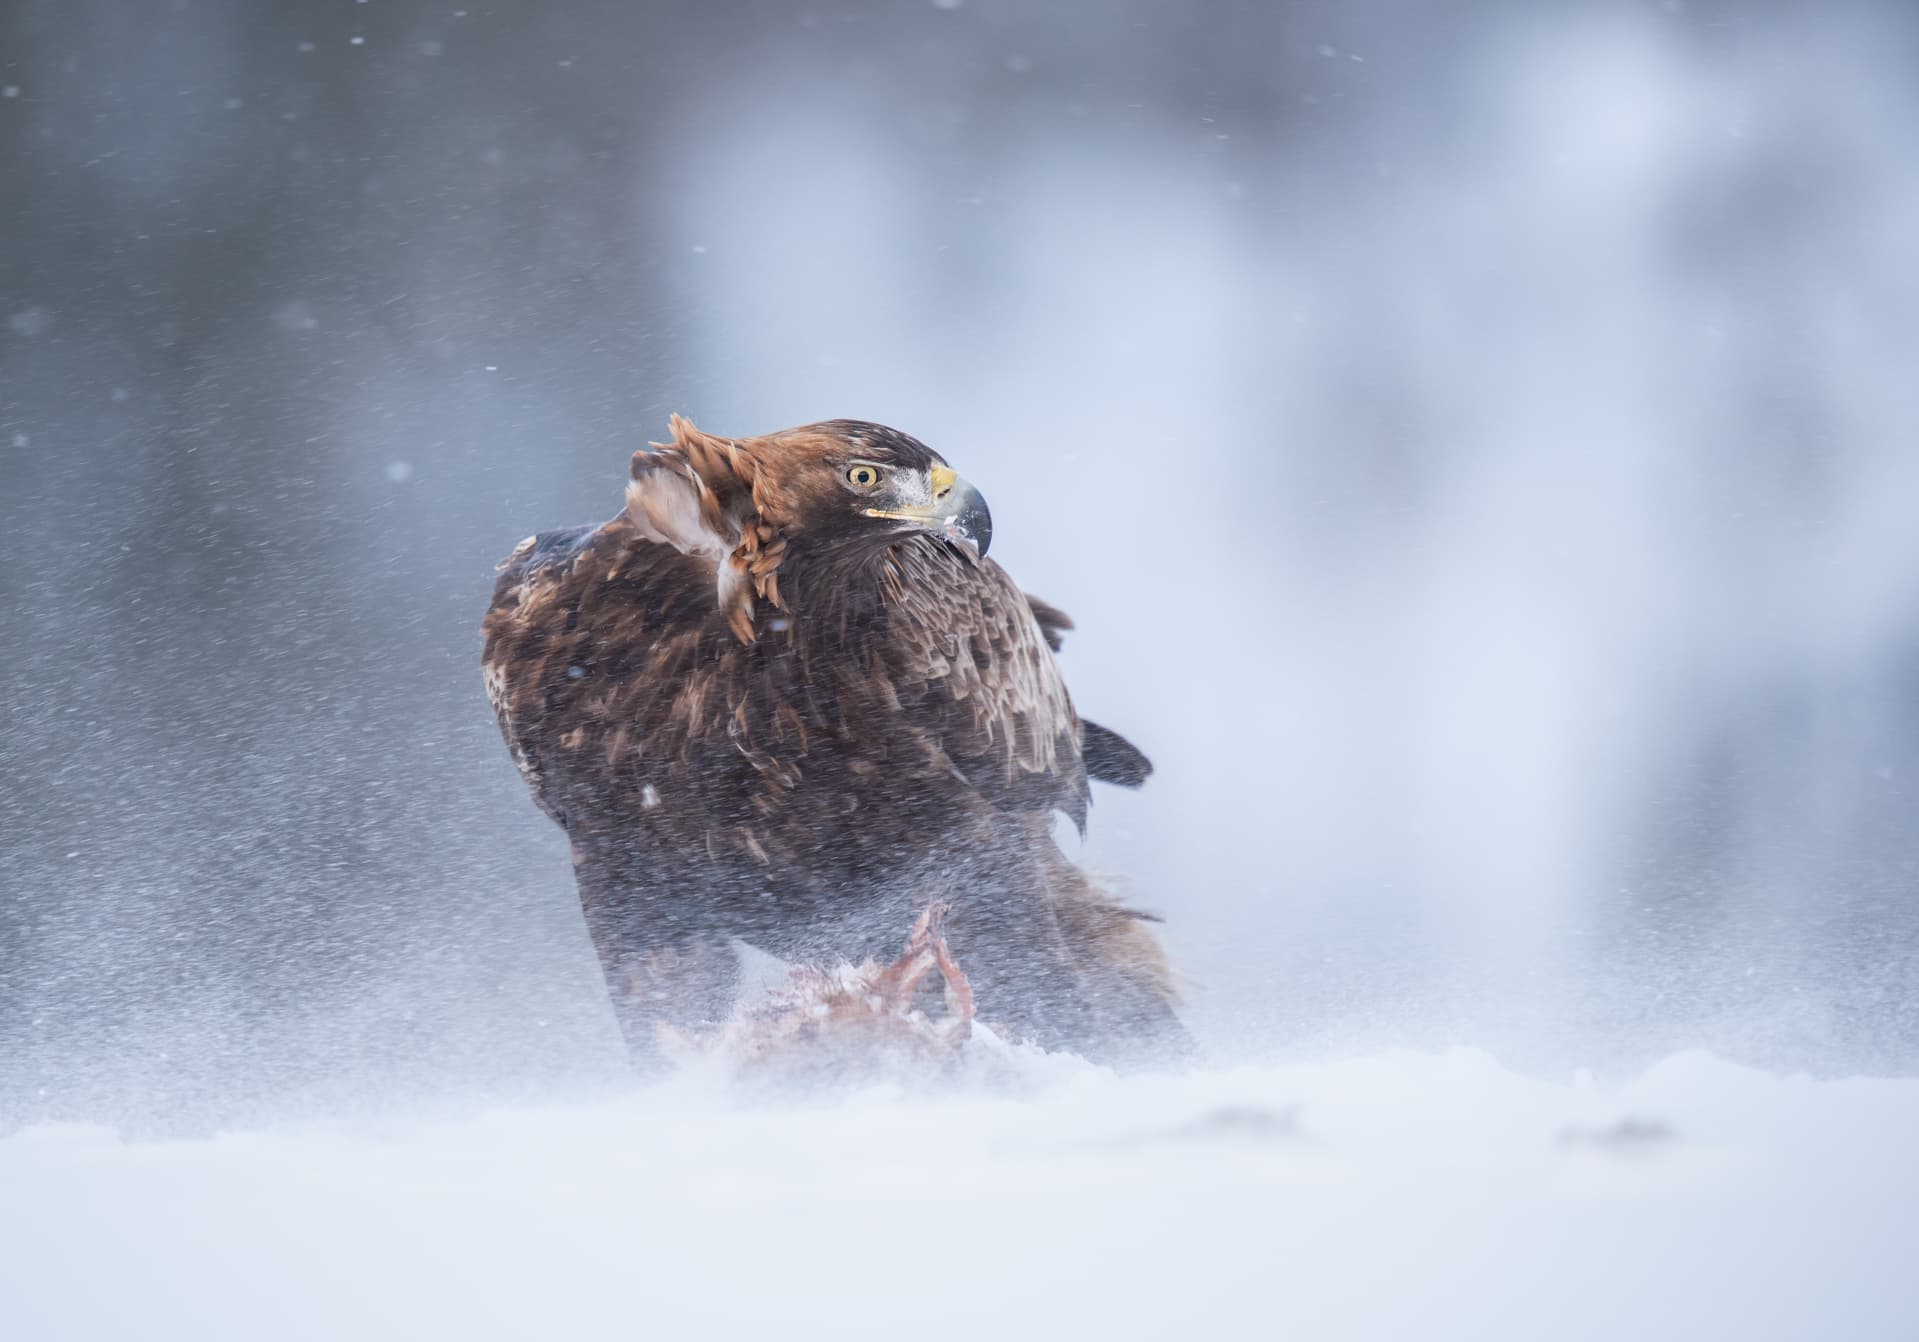 A lone Golden Eagle in the snow - one of the species photographed during the Winter Eagles of Norway photography holiday